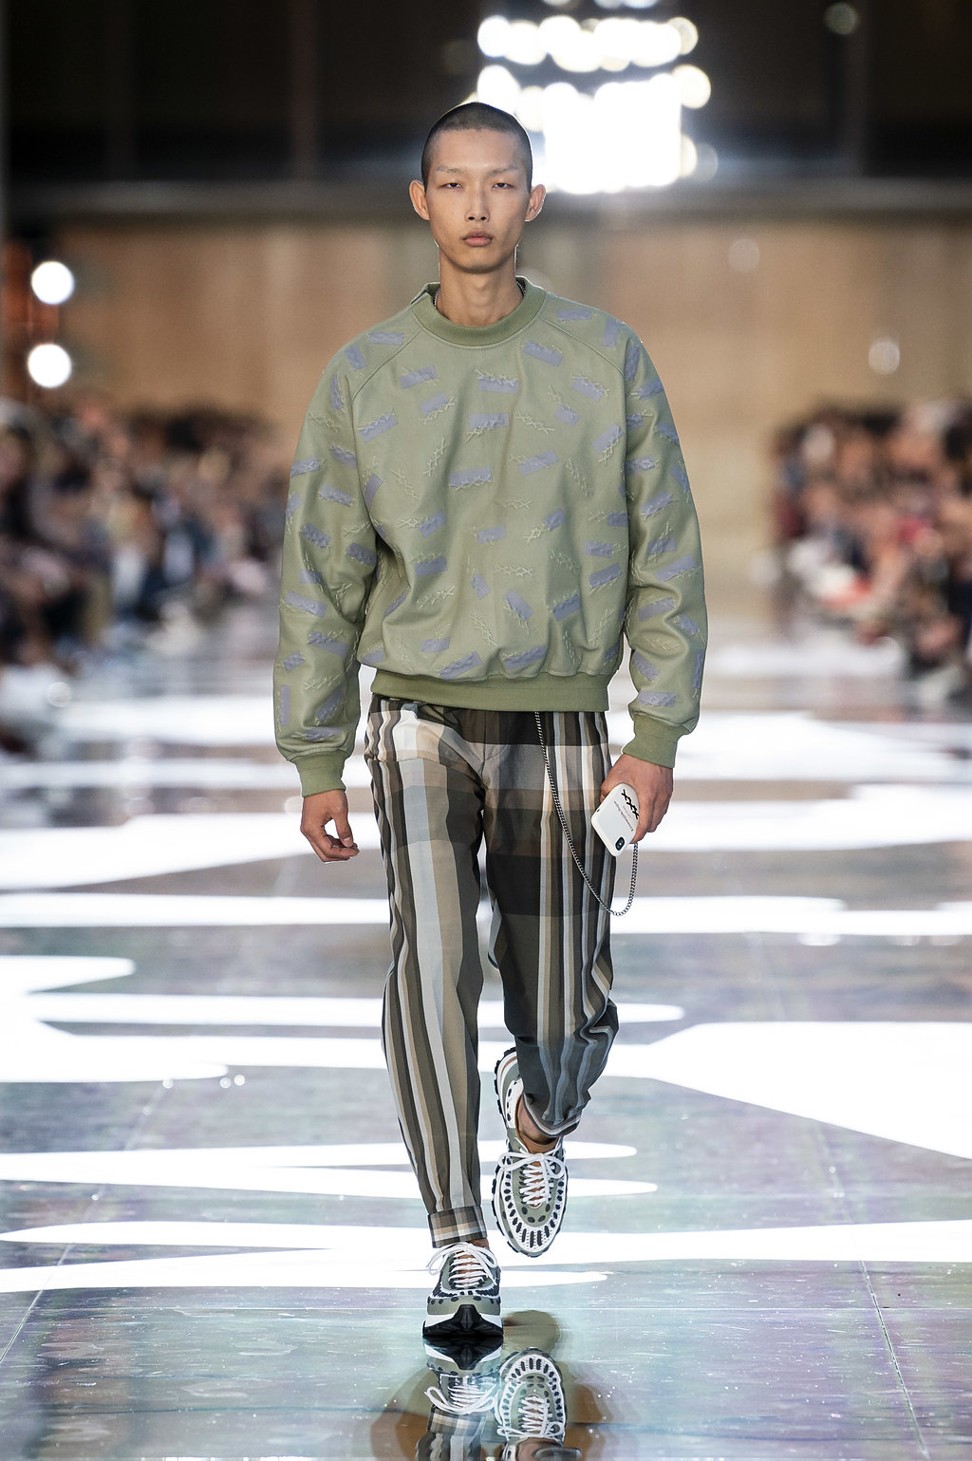 Zegna’s spring/summer 2019 collection